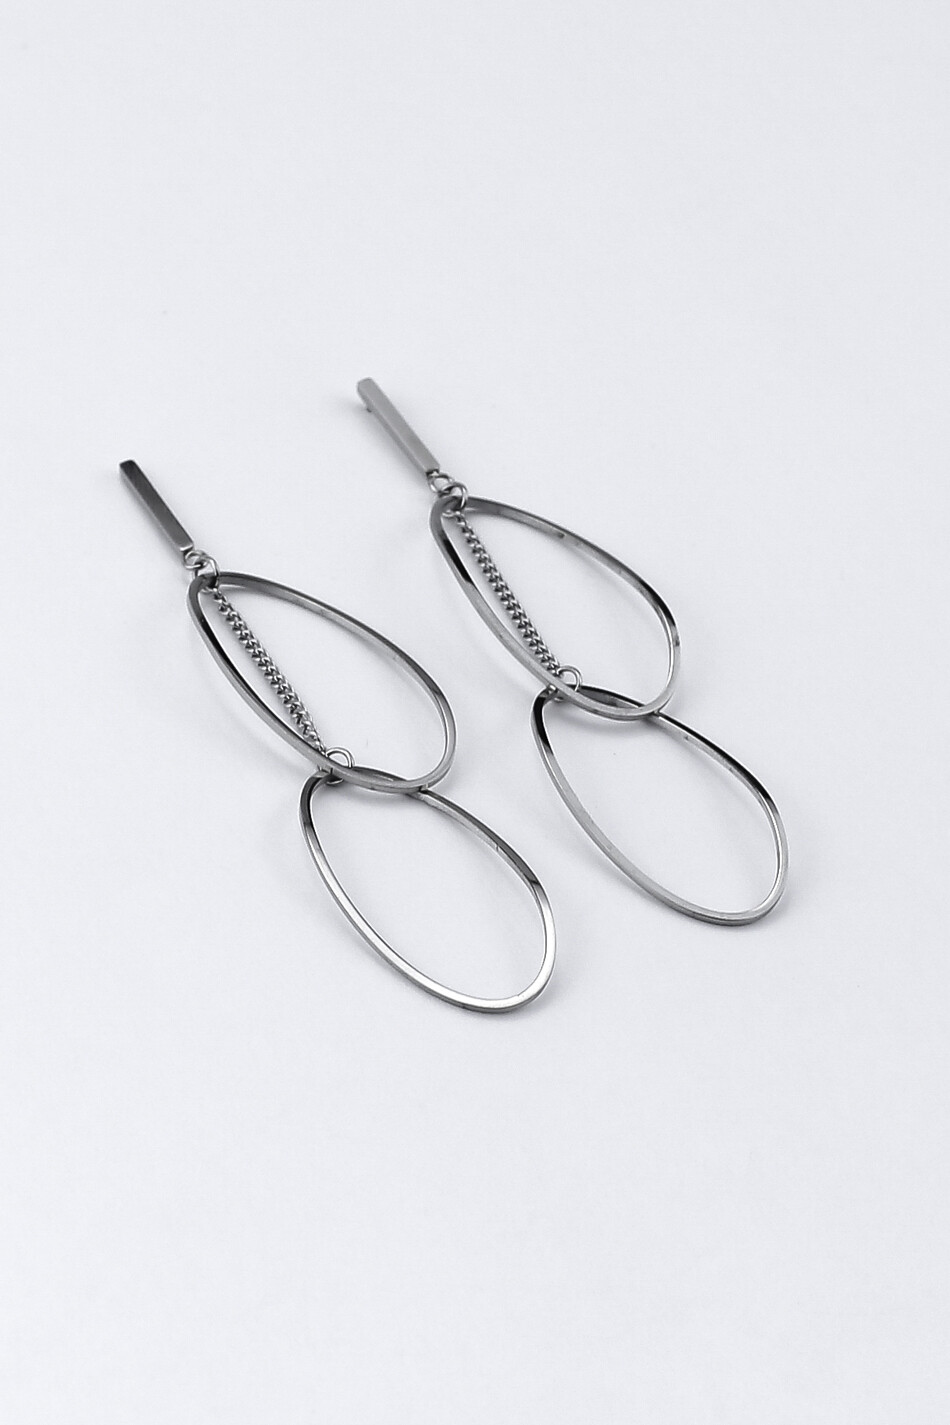 Earrings "Two curved ovals"